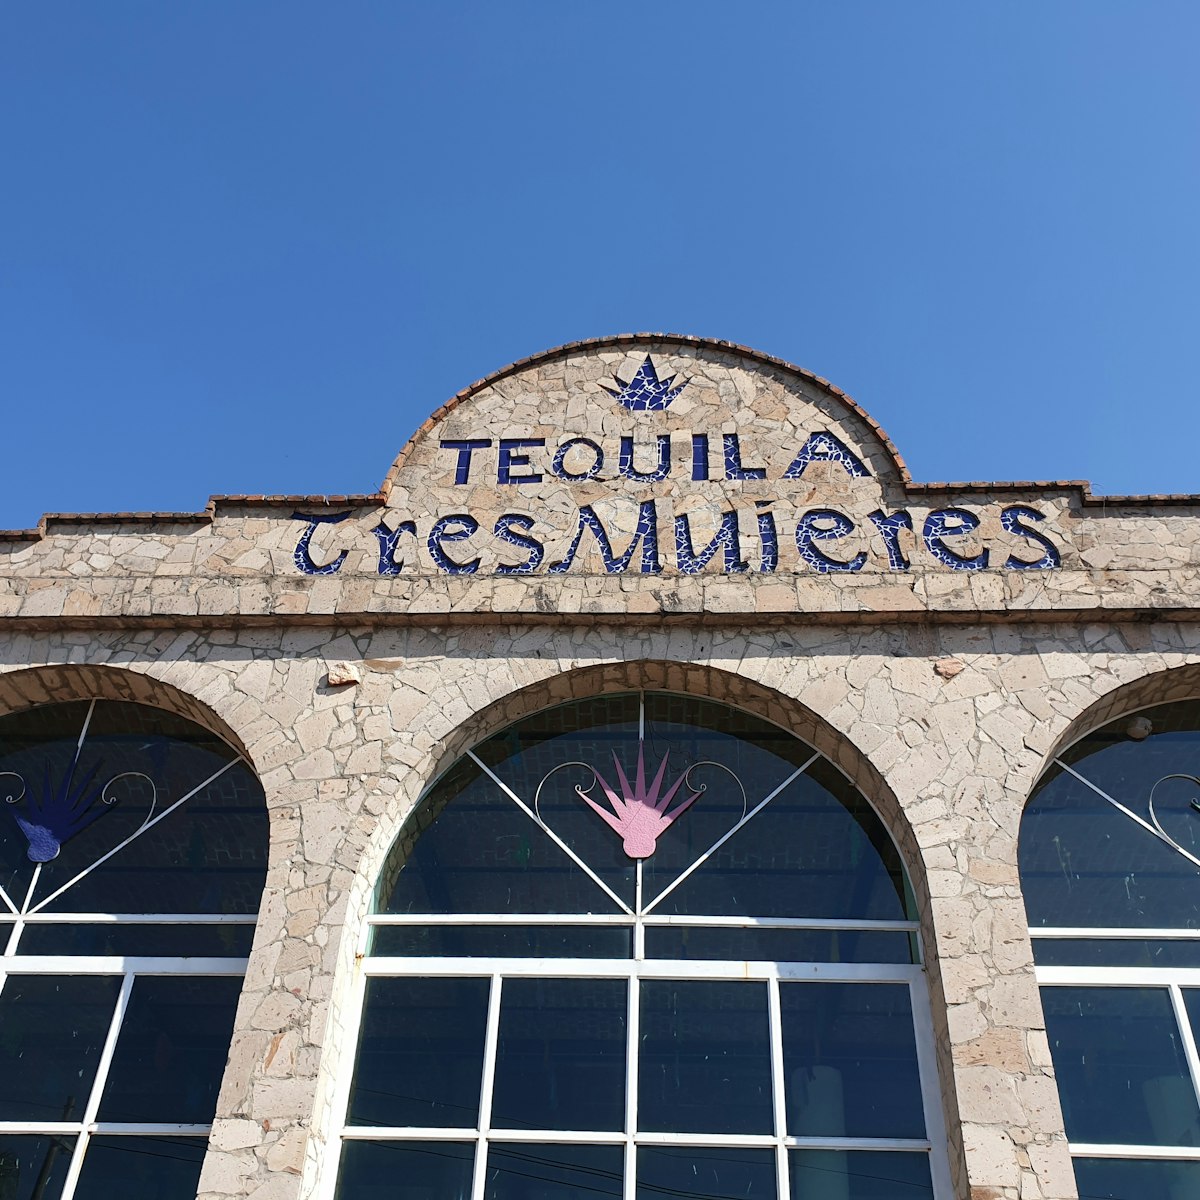 Main building of Tres Mujeres, a tequila company dedicated to the artisan manufacture of tequila near Amatitan.